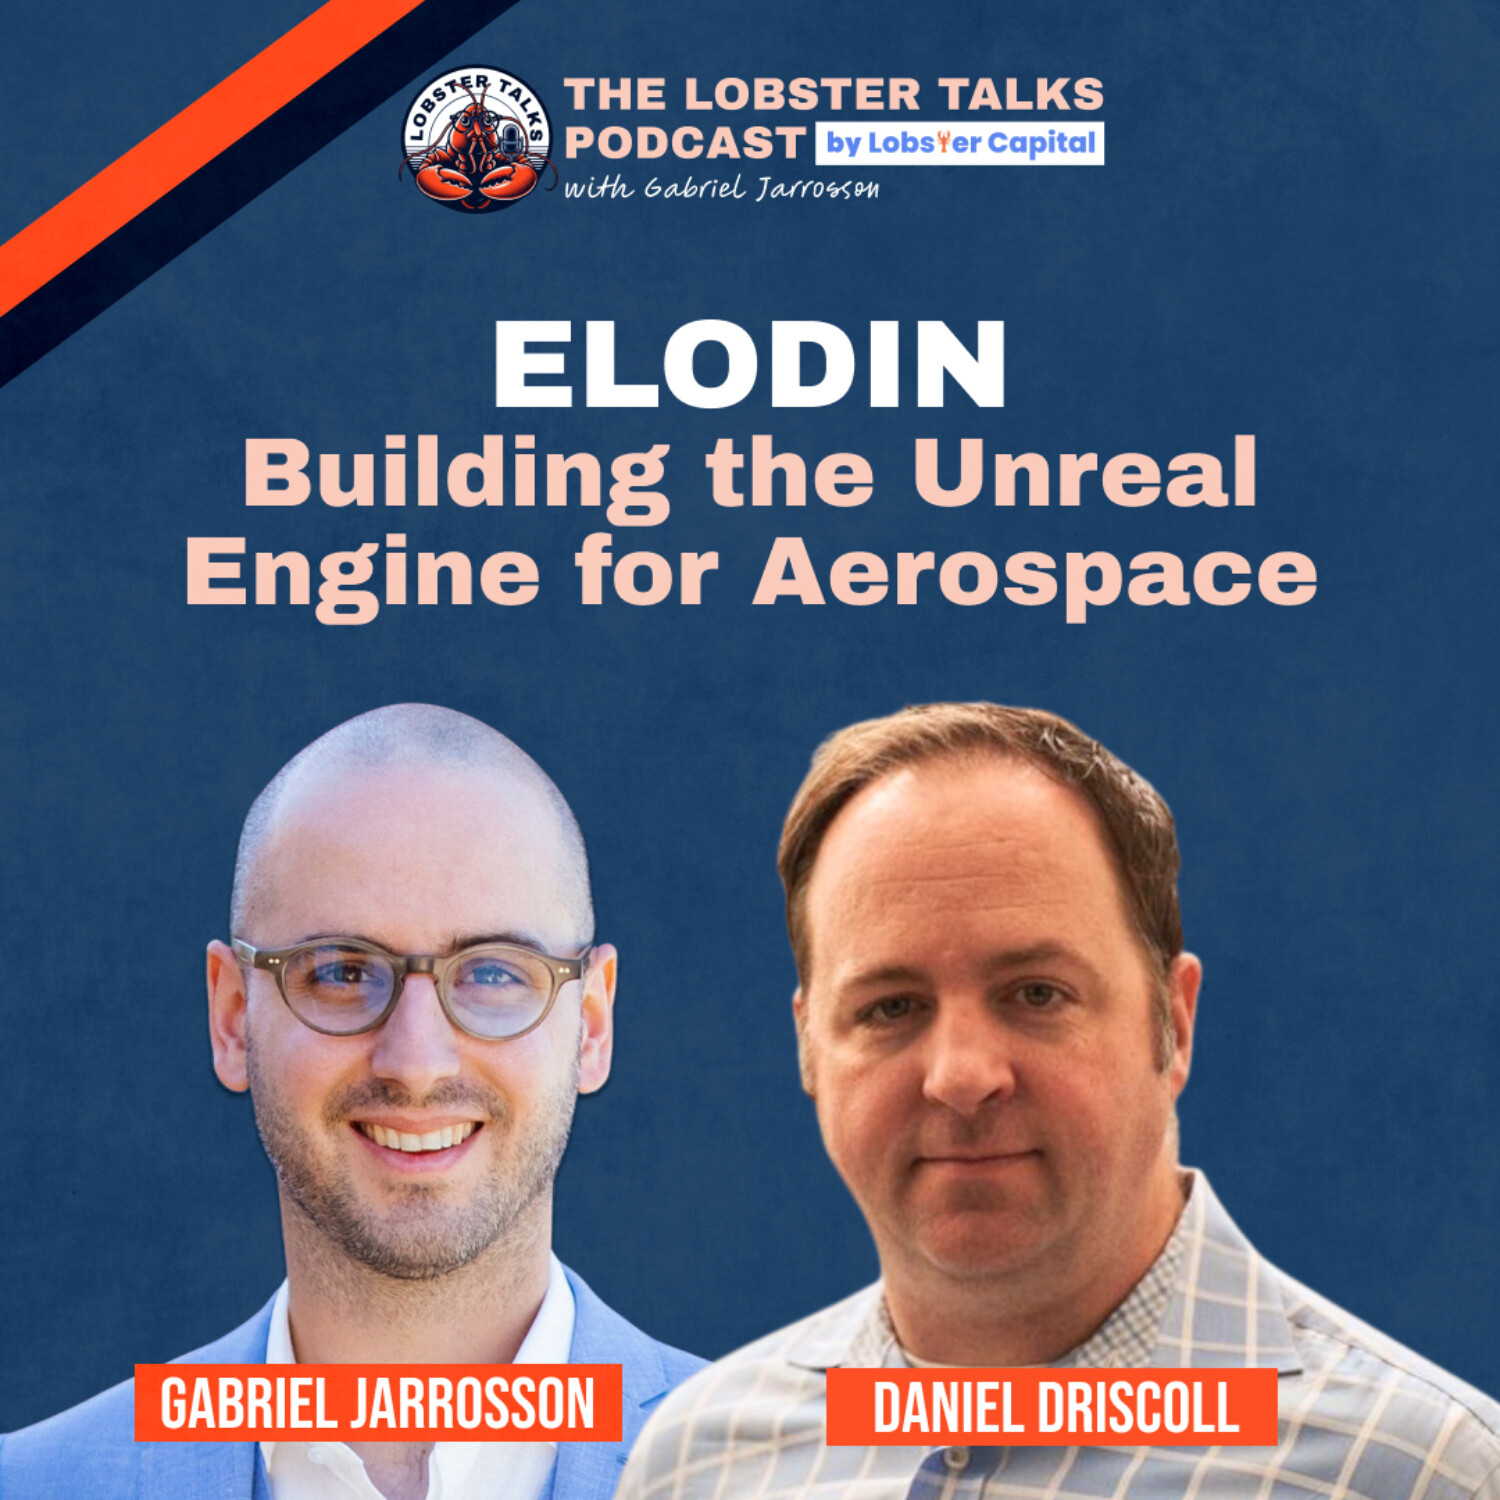 Elodin- Building the Unreal Engine for Aerospace with Ex-Military Founder Daniel Driscoll | Episode 13